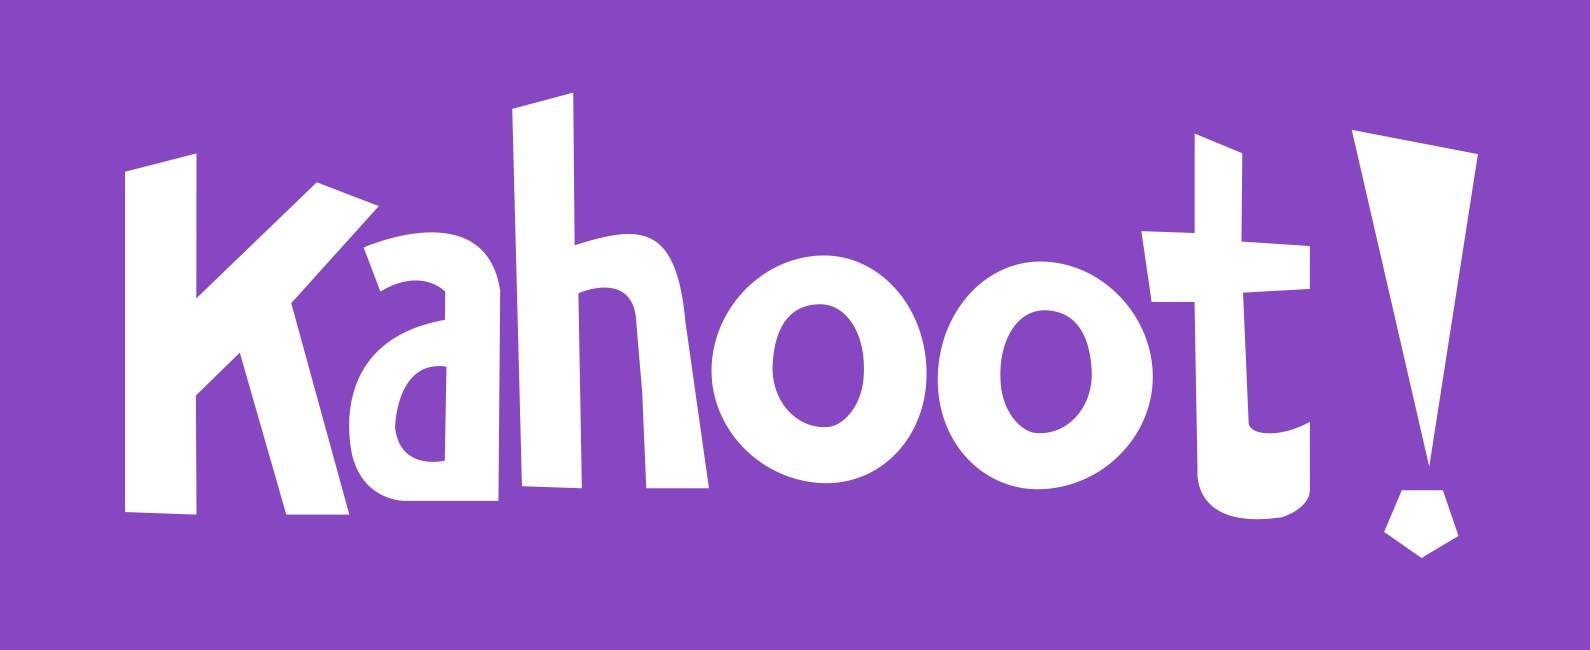 Kahoot! Launches New Mobile App To Make Homework Fun; App Also Unlocks A Social Gaming Experience On The Go For Everyone